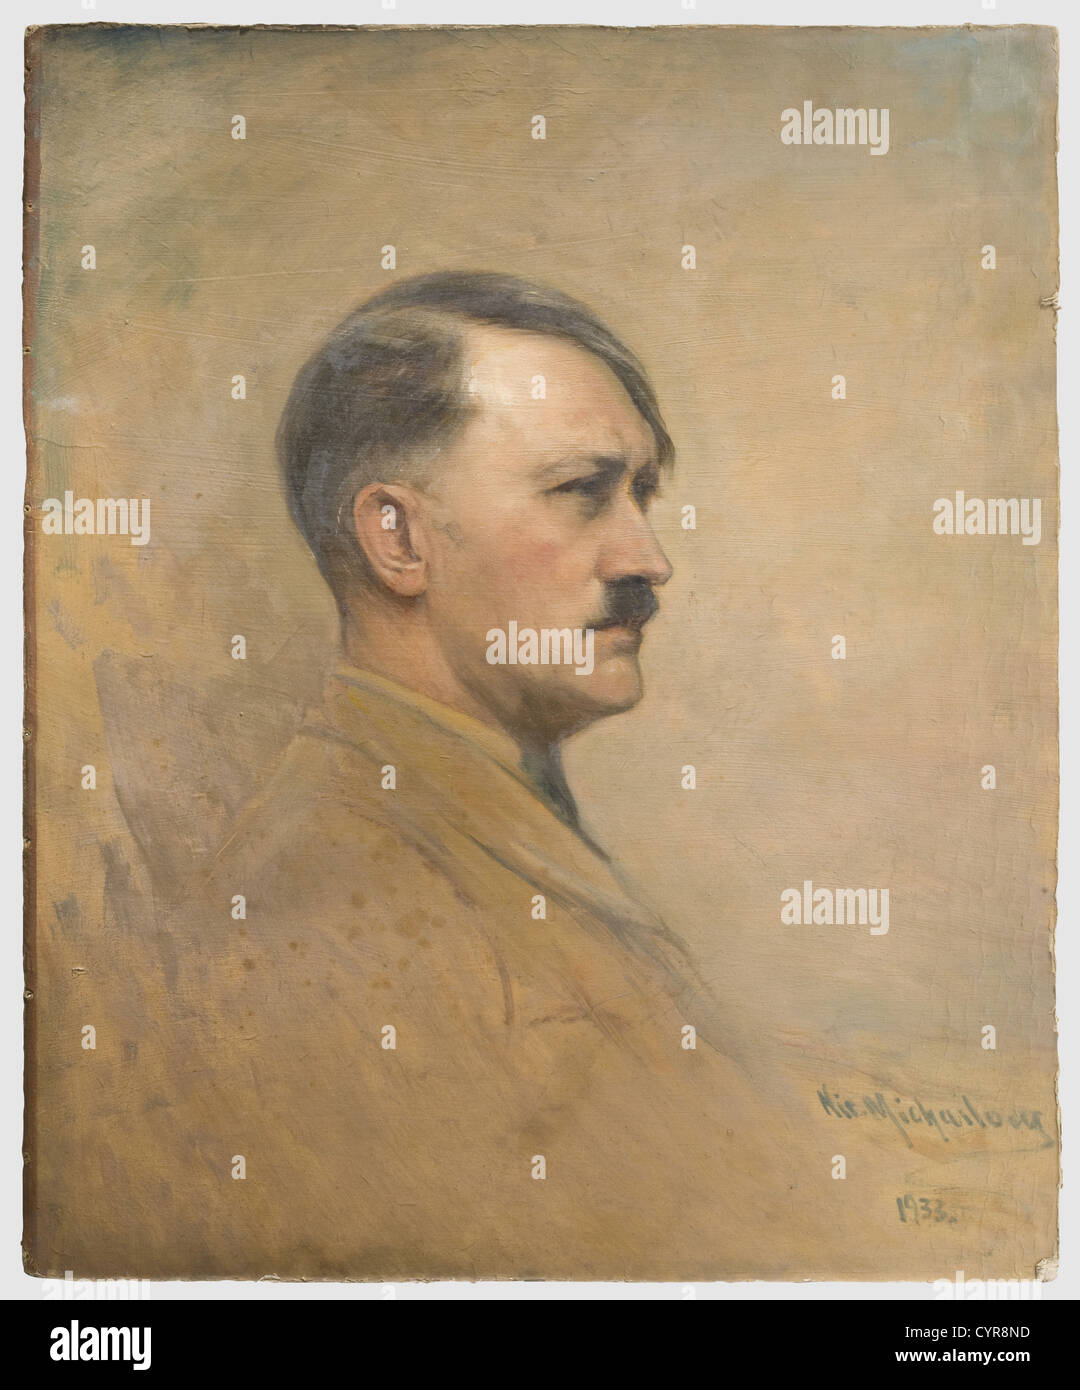 Nikola Michailow (1876 - 1960), a portrait of Adolf Hitler Oil on carton. Hitler sitting, head turned to the right. Signed and dated at lower right 'Nic.Michailow 1933'. Ca. 70 x 57 cm. Professor Nikola Michailow was born 1876 in Sumen, Bulgaria, he died 1960 in Hamburg. He studied at the Academy in Munich, was a professor in Sofia and court painter of Bulgarian Tsar Ferdinand, domiciled in Berlin from 1910. During the 1920s and 30s he developed into one of the great portraitists and painted, among others, the Bulgarian royal family, King Ferdinand, Tsar Boris , Stock Photo